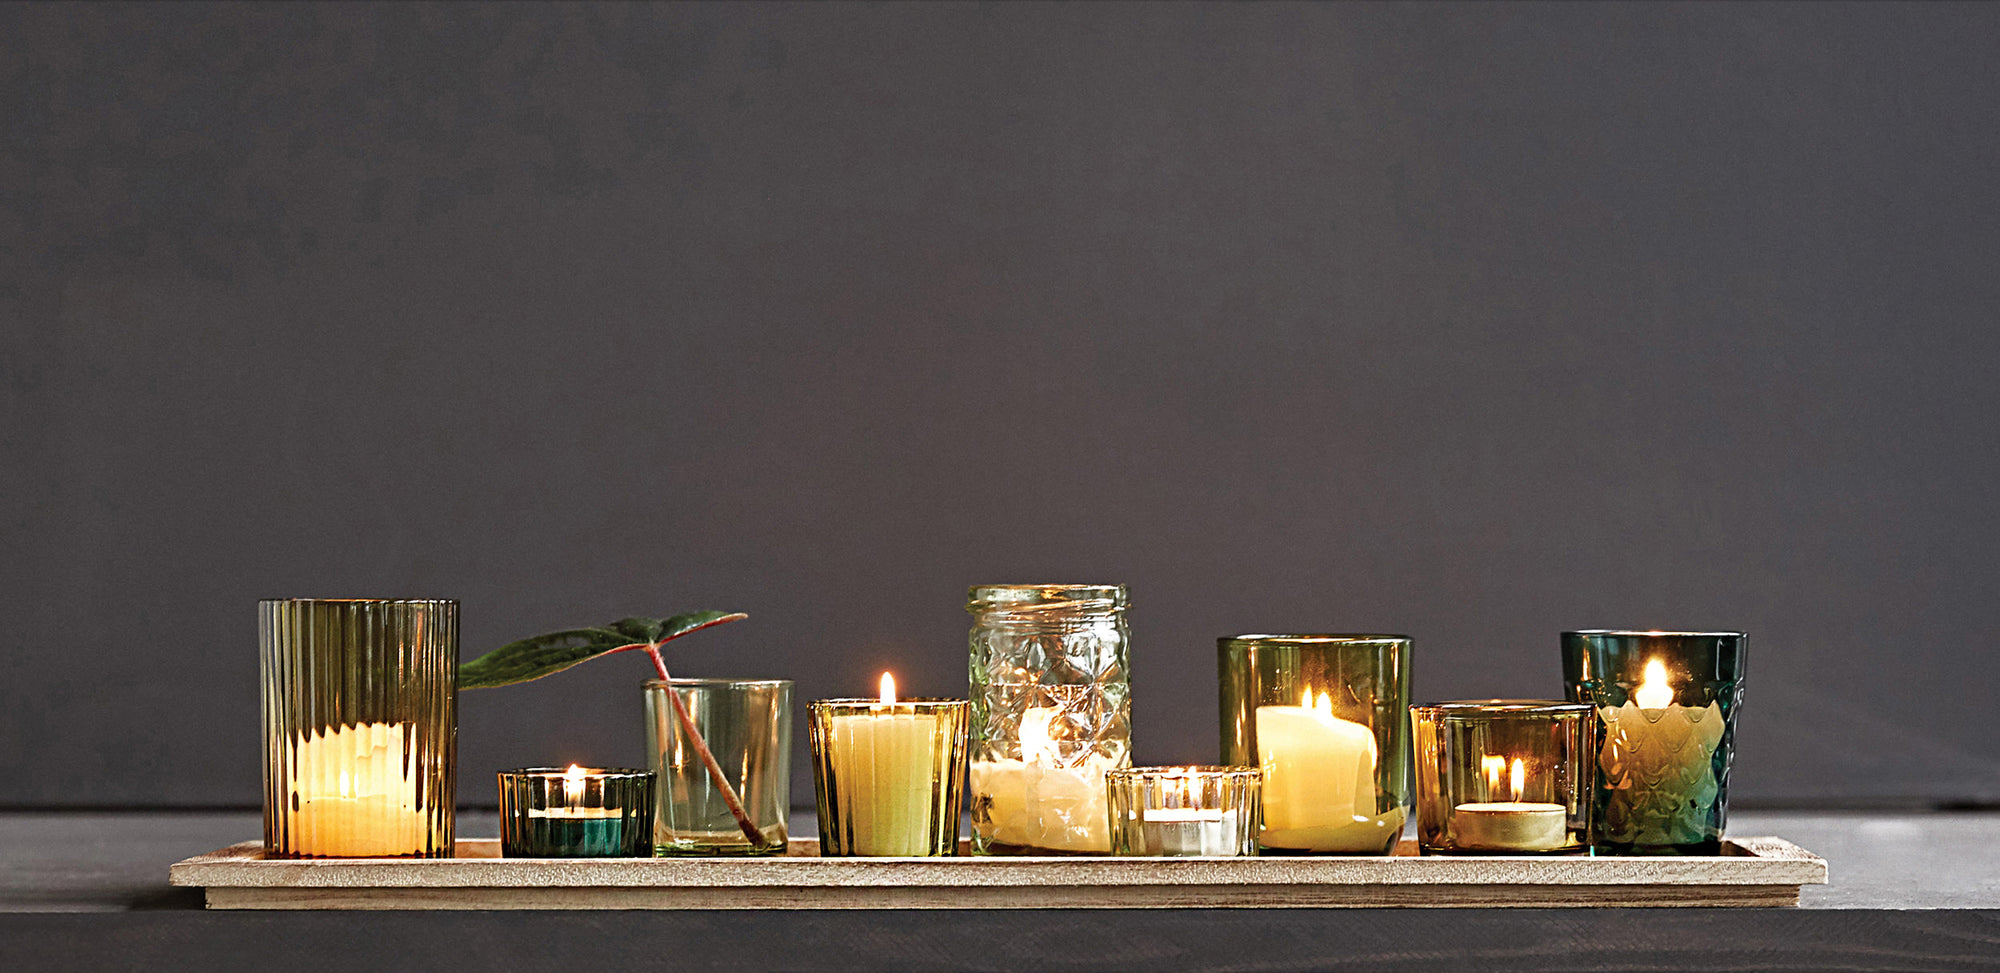 Green Glass Tealight Candle Holders With Wood Tray